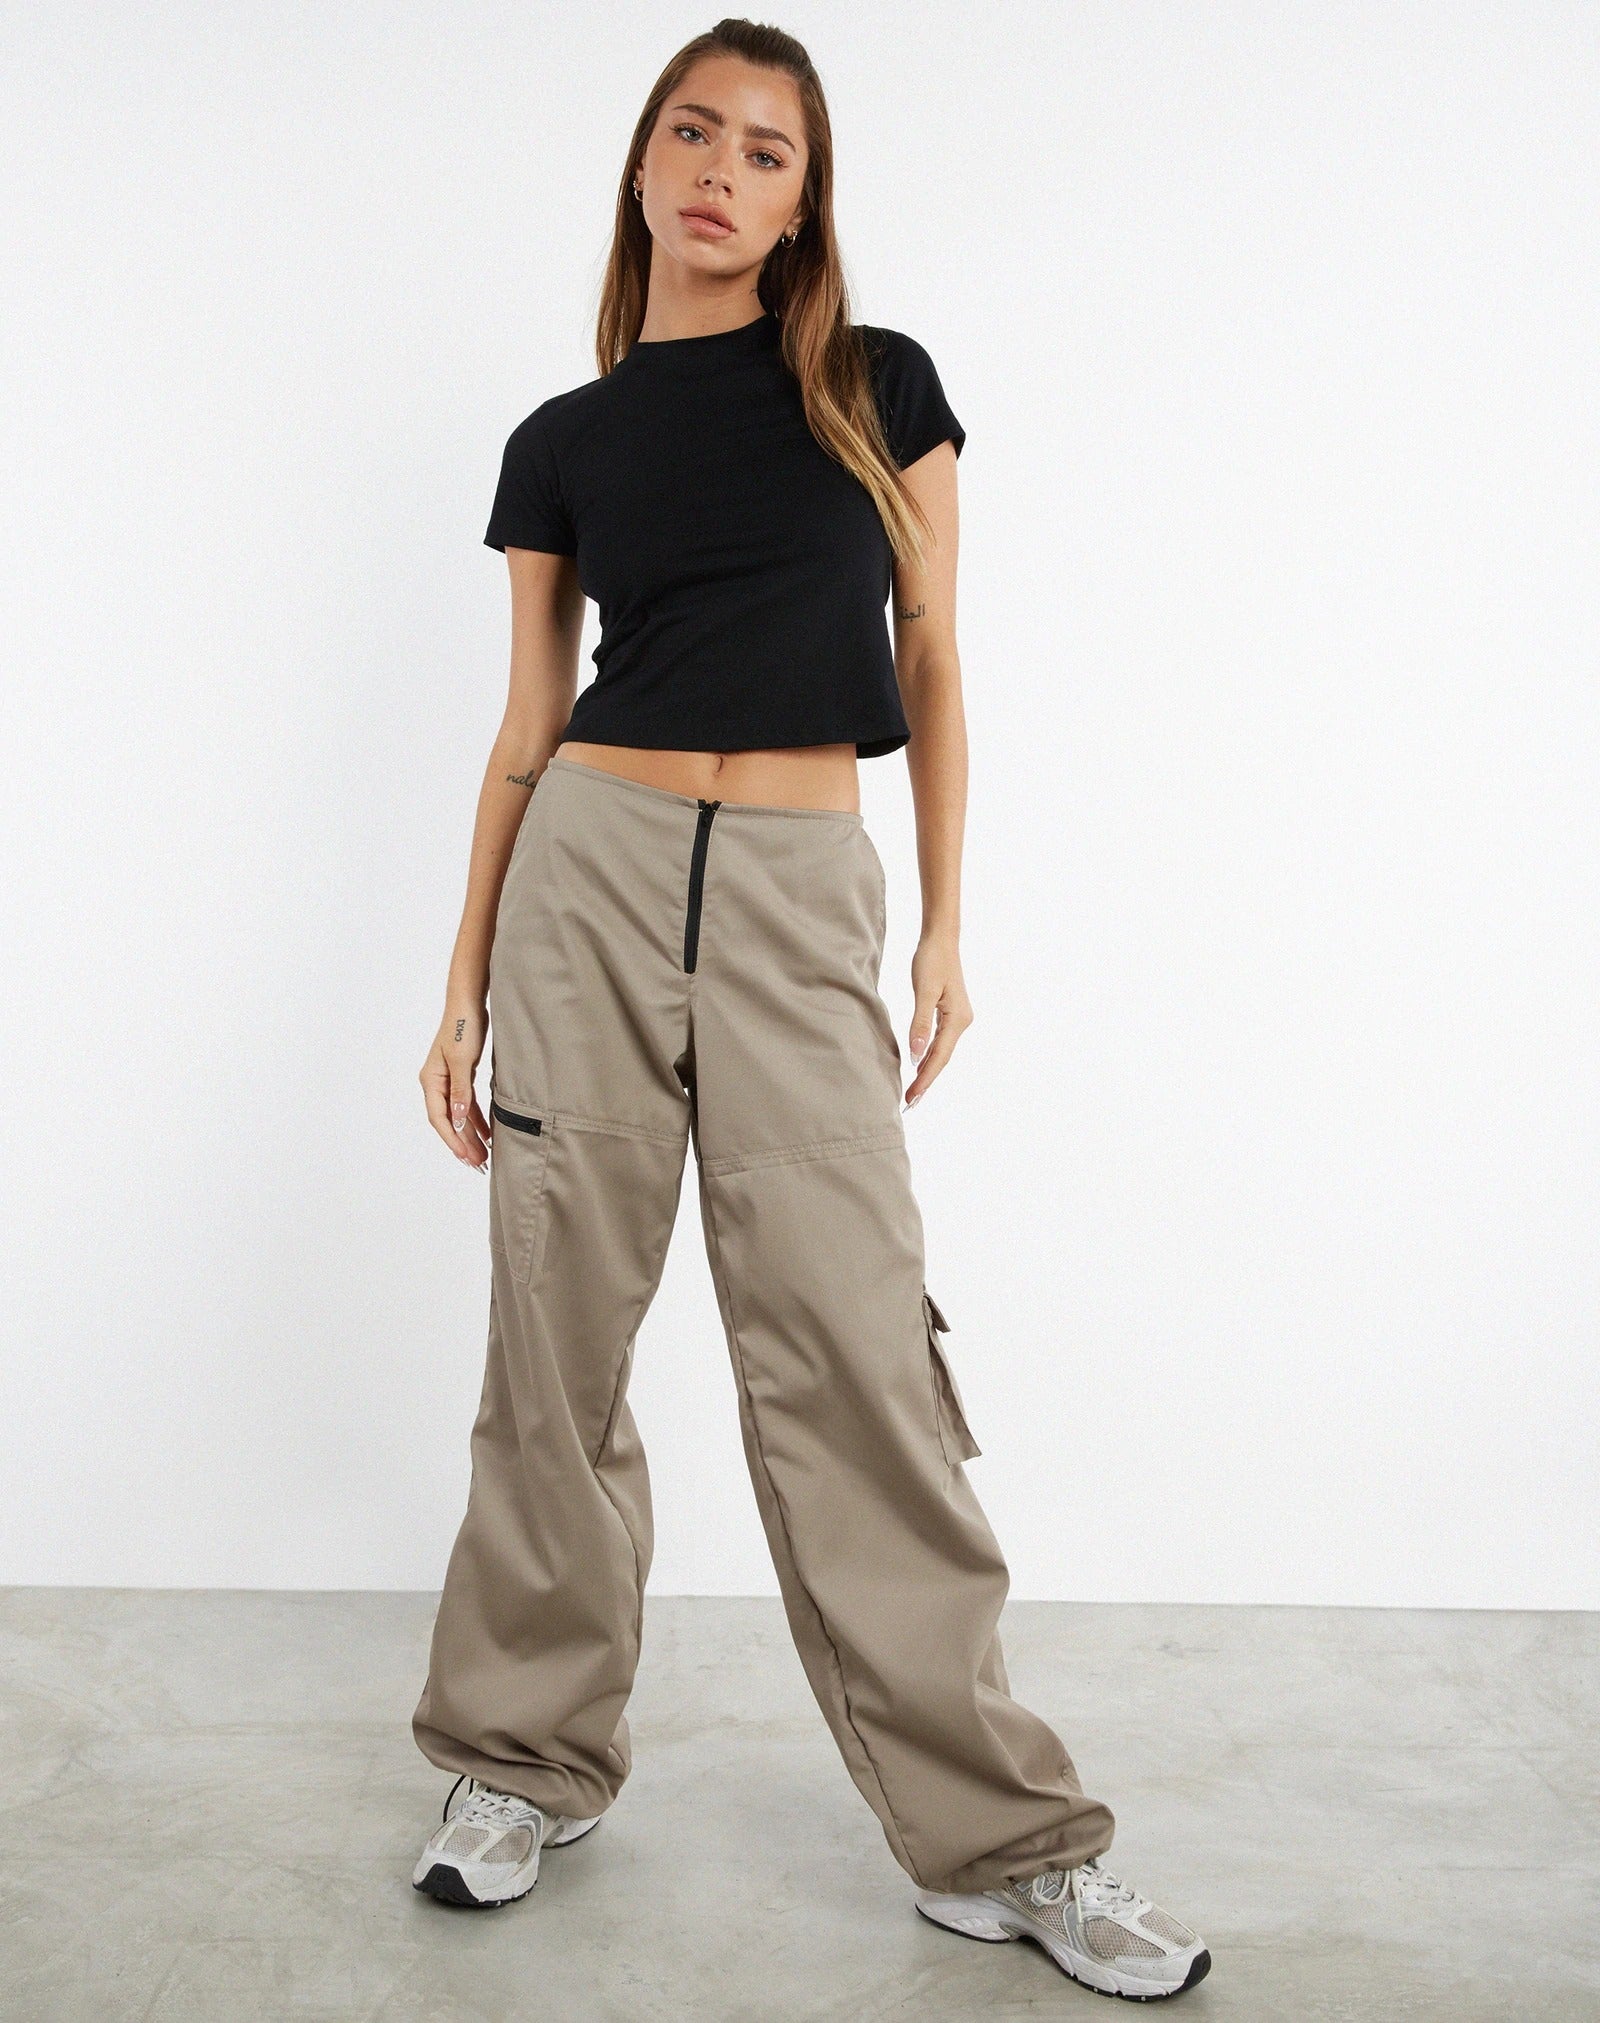 Cargo Pants Are Back in Style - Coveteur: Inside Closets, Fashion, Beauty,  Health, and Travel